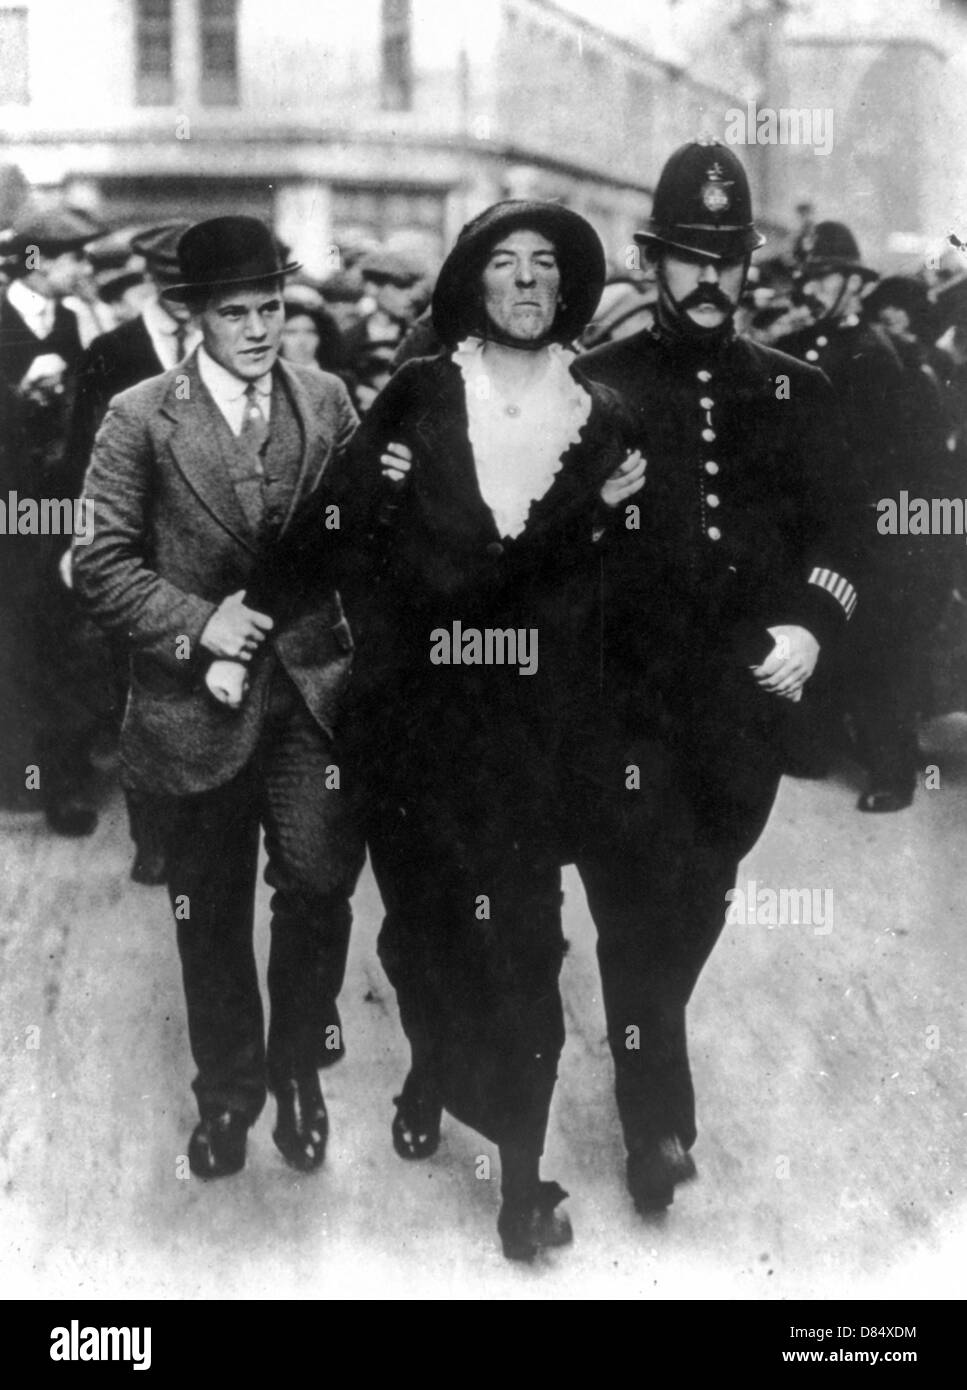 Arrest of Suffragette by policemen and plain clothesman escorting woman, London, UK Stock Photo